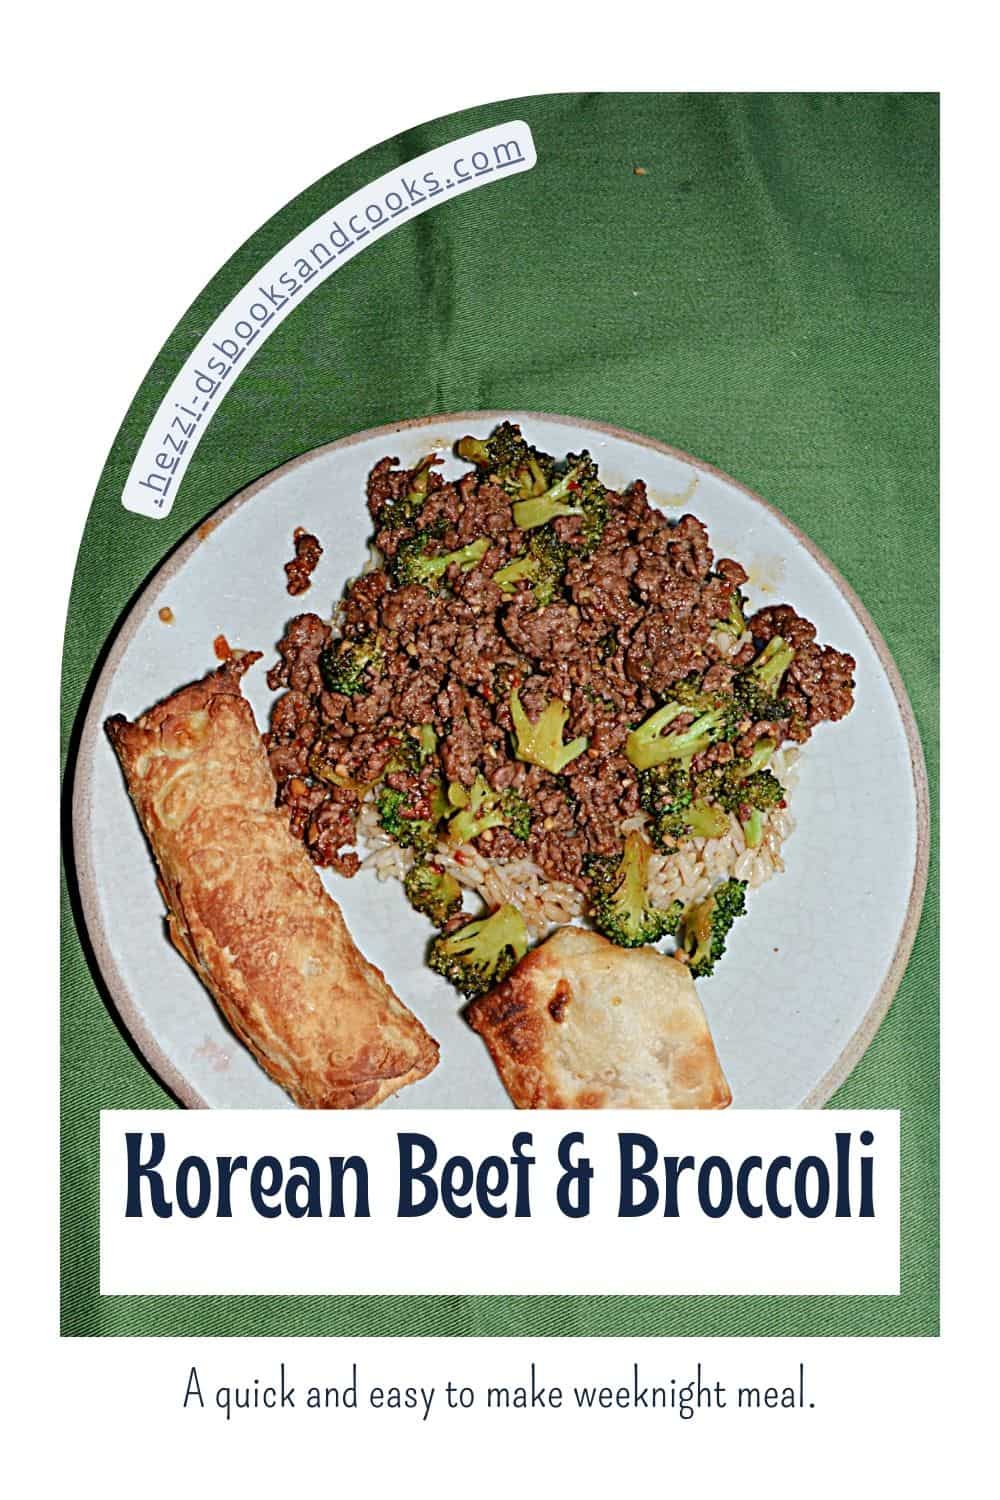 Pin Image:   A plate of beef and broccoli, egg roll, and wonton, text title. 